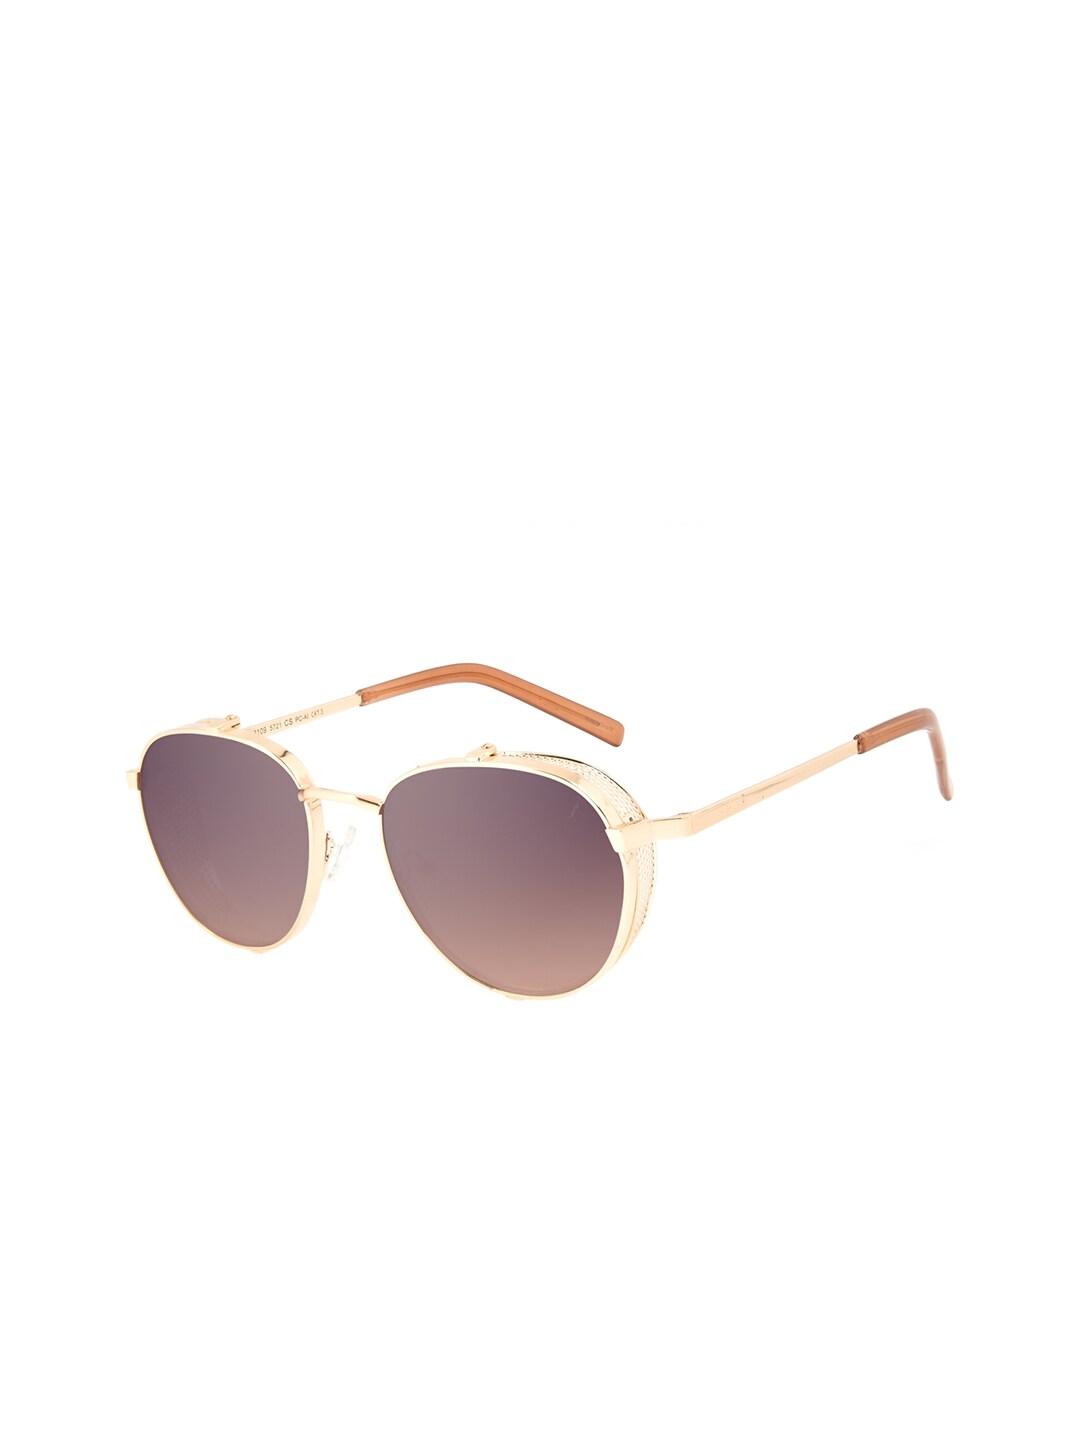 Chilli Beans Unisex Bronze Lens & Gold-Toned Round Sunglasses with UV Protected Lens